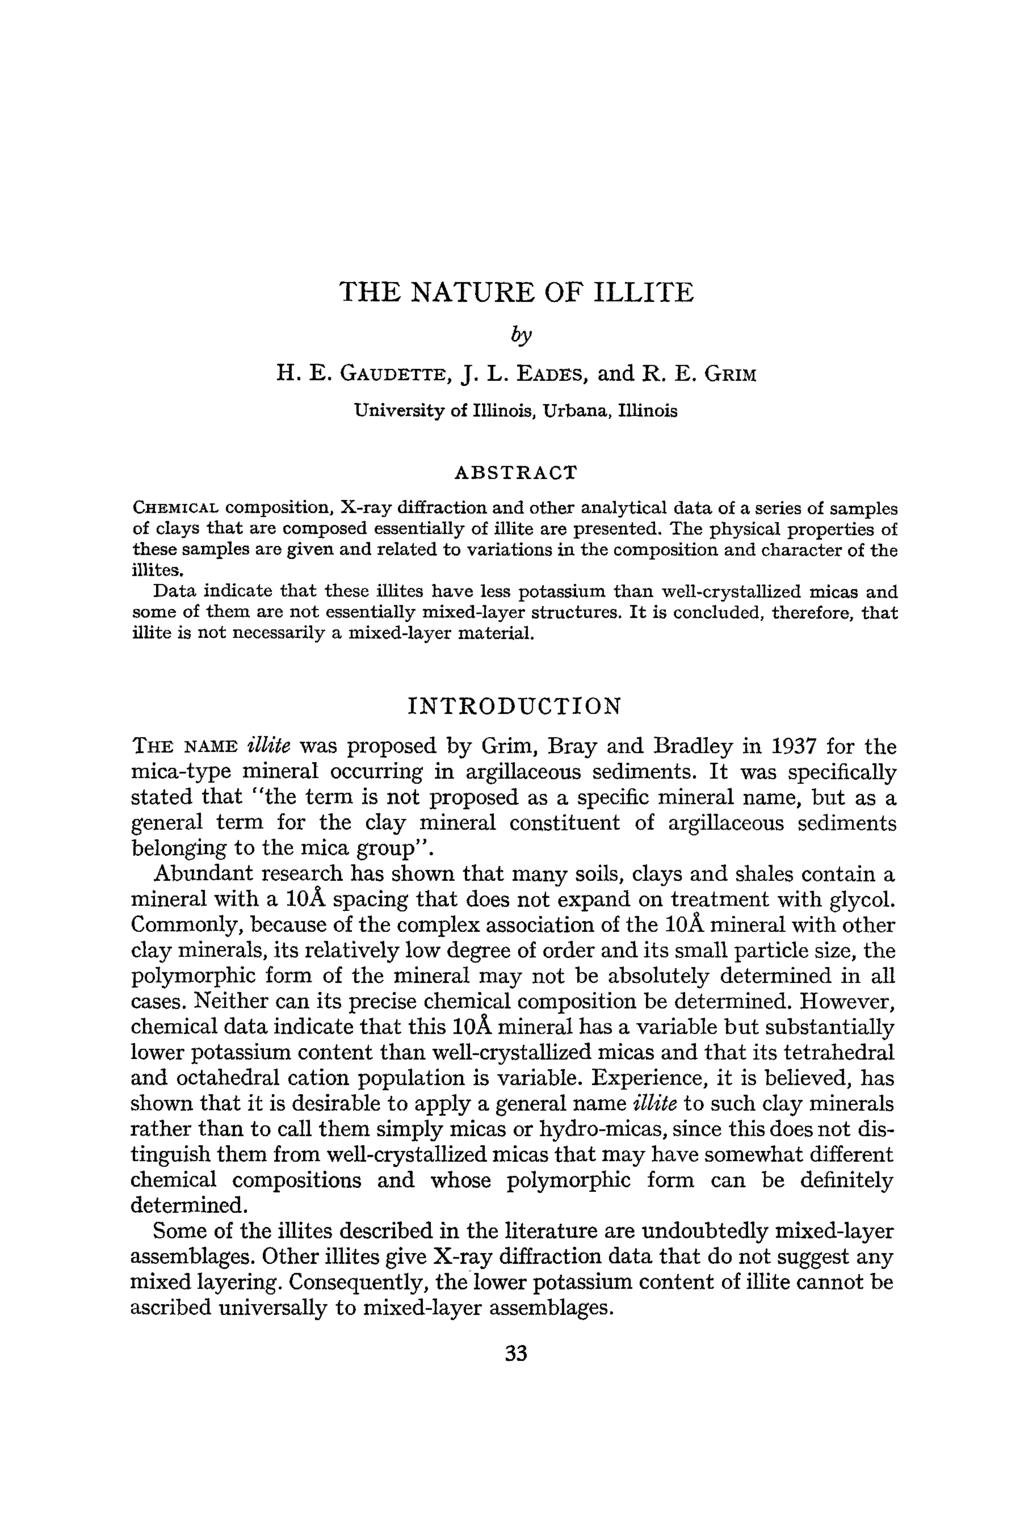 THE NATURE OF ILLITE by H. E. GAUDETTE, J. L. EADES, and R. E. GRIM University of Illinois, Urbana, Illinois ABSTRACT CHEMICAL composition.